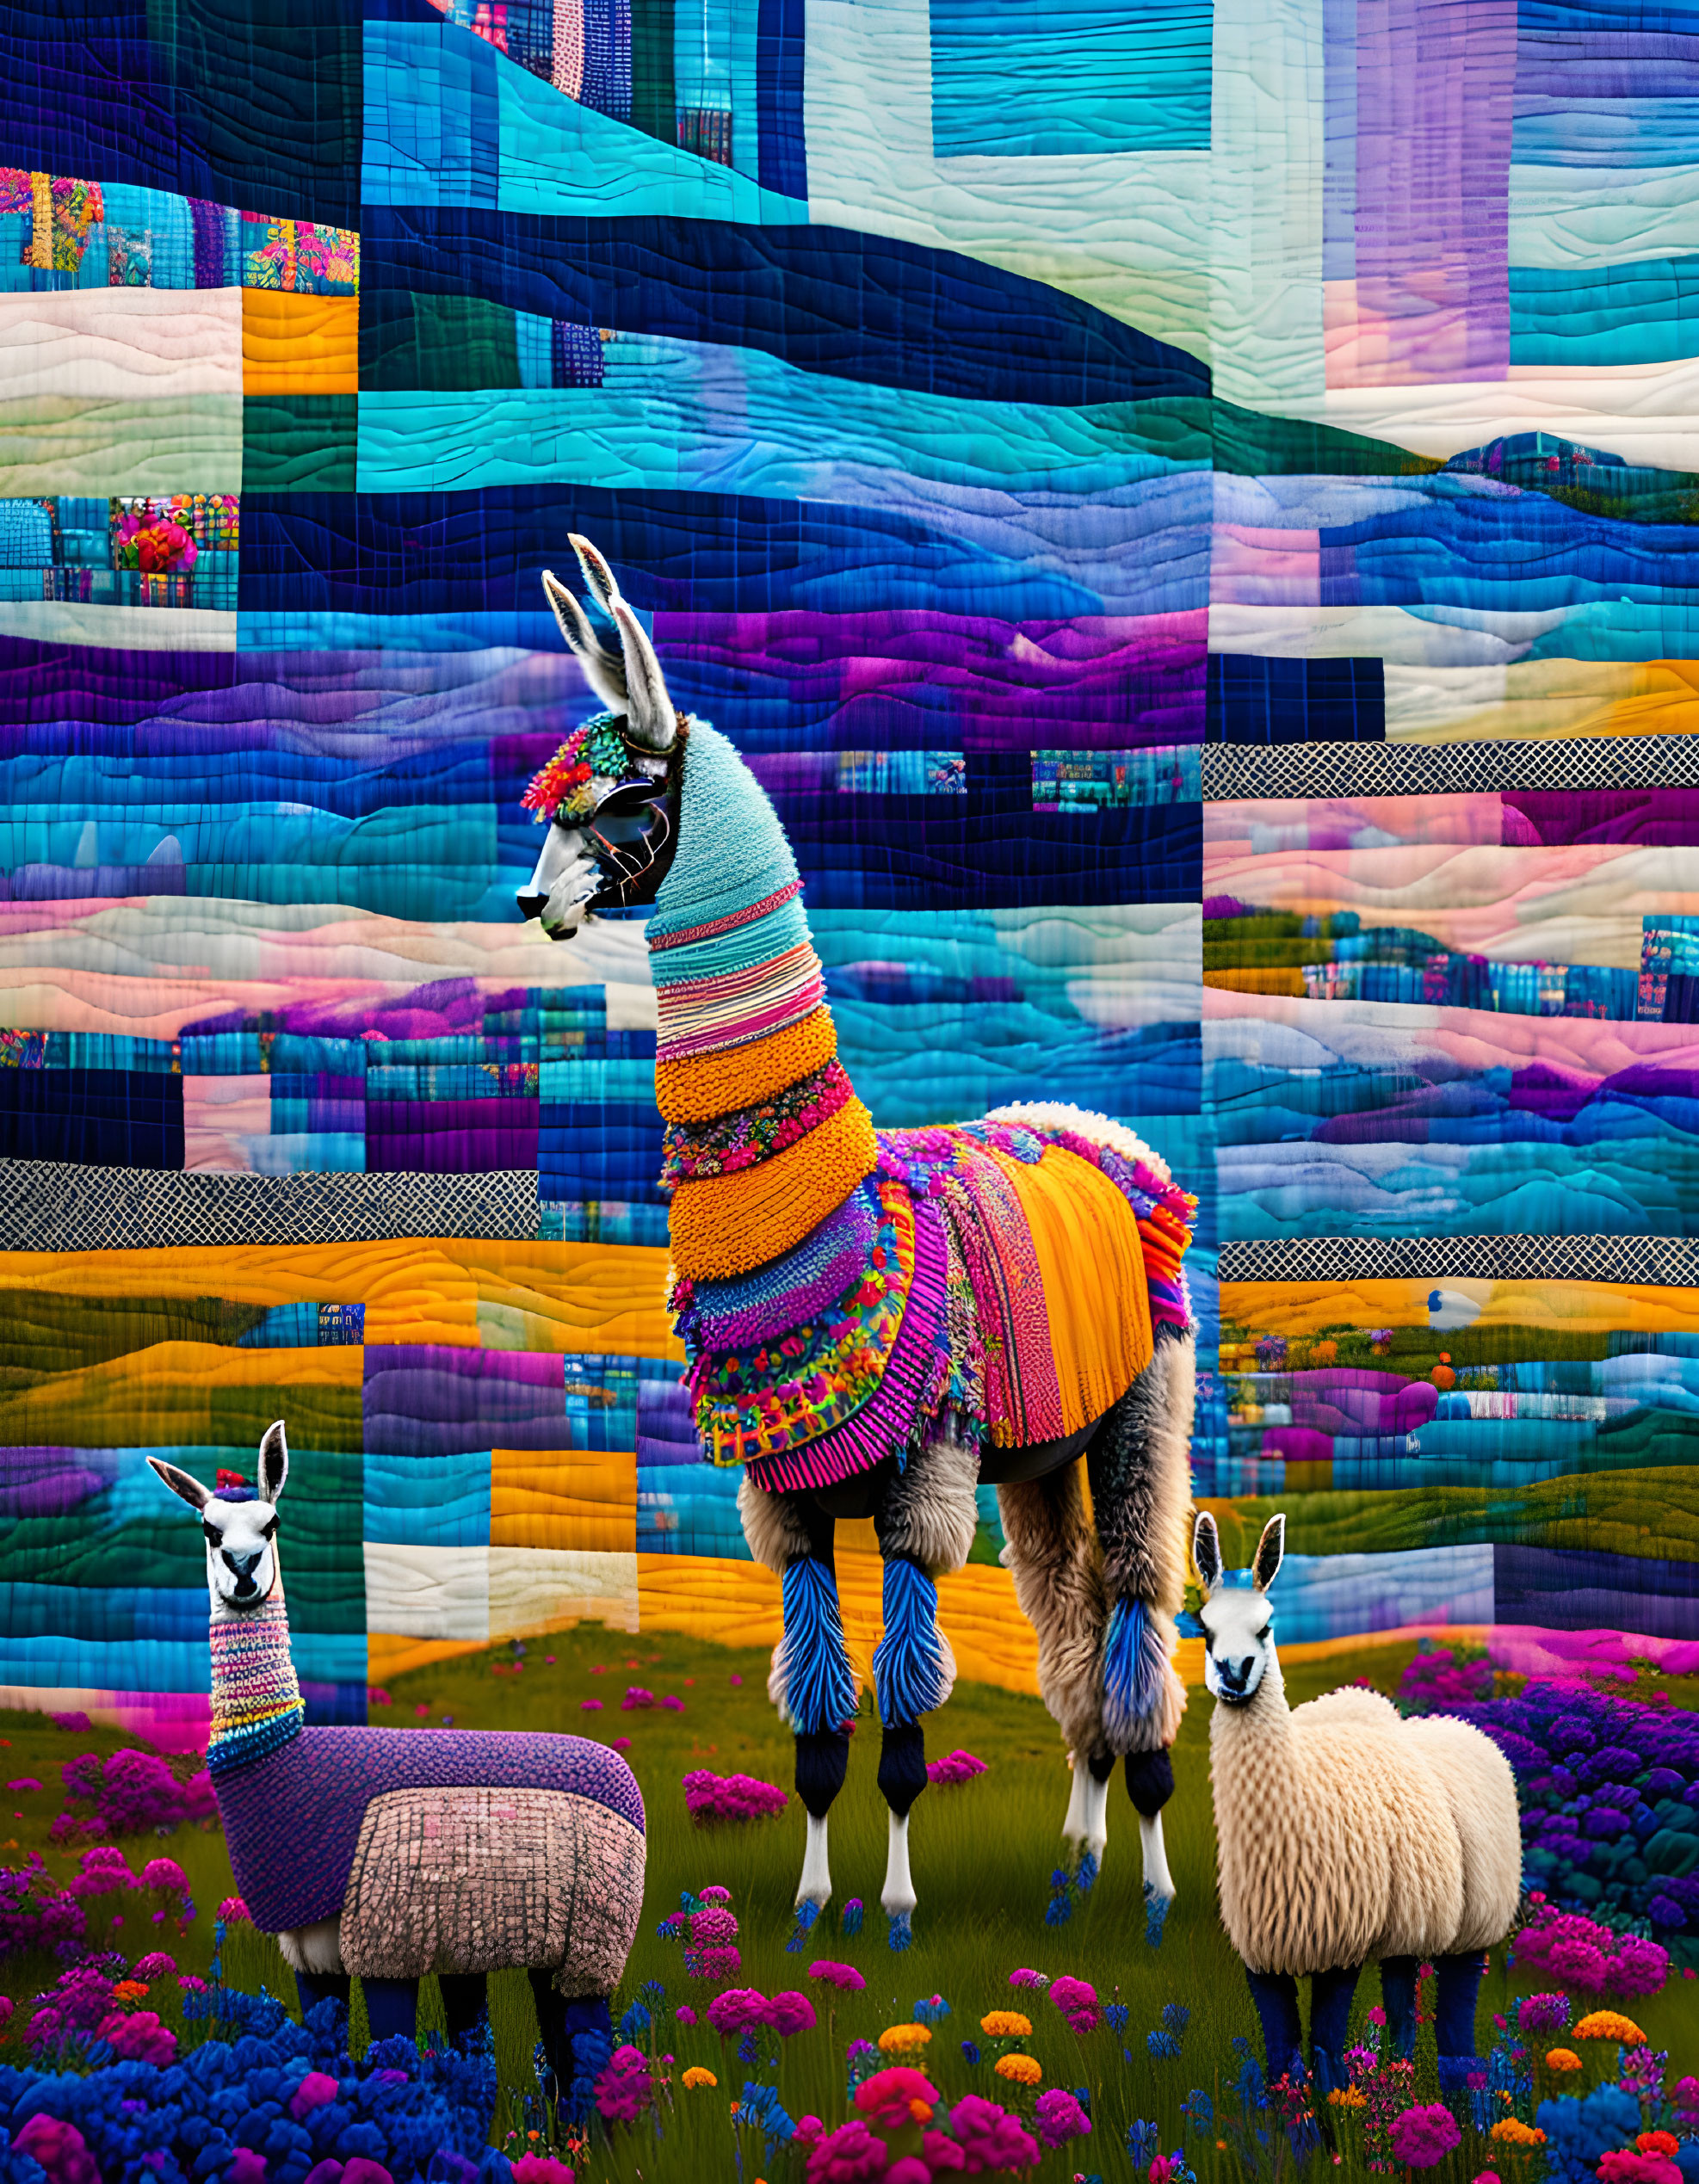 One llama to watch over them 